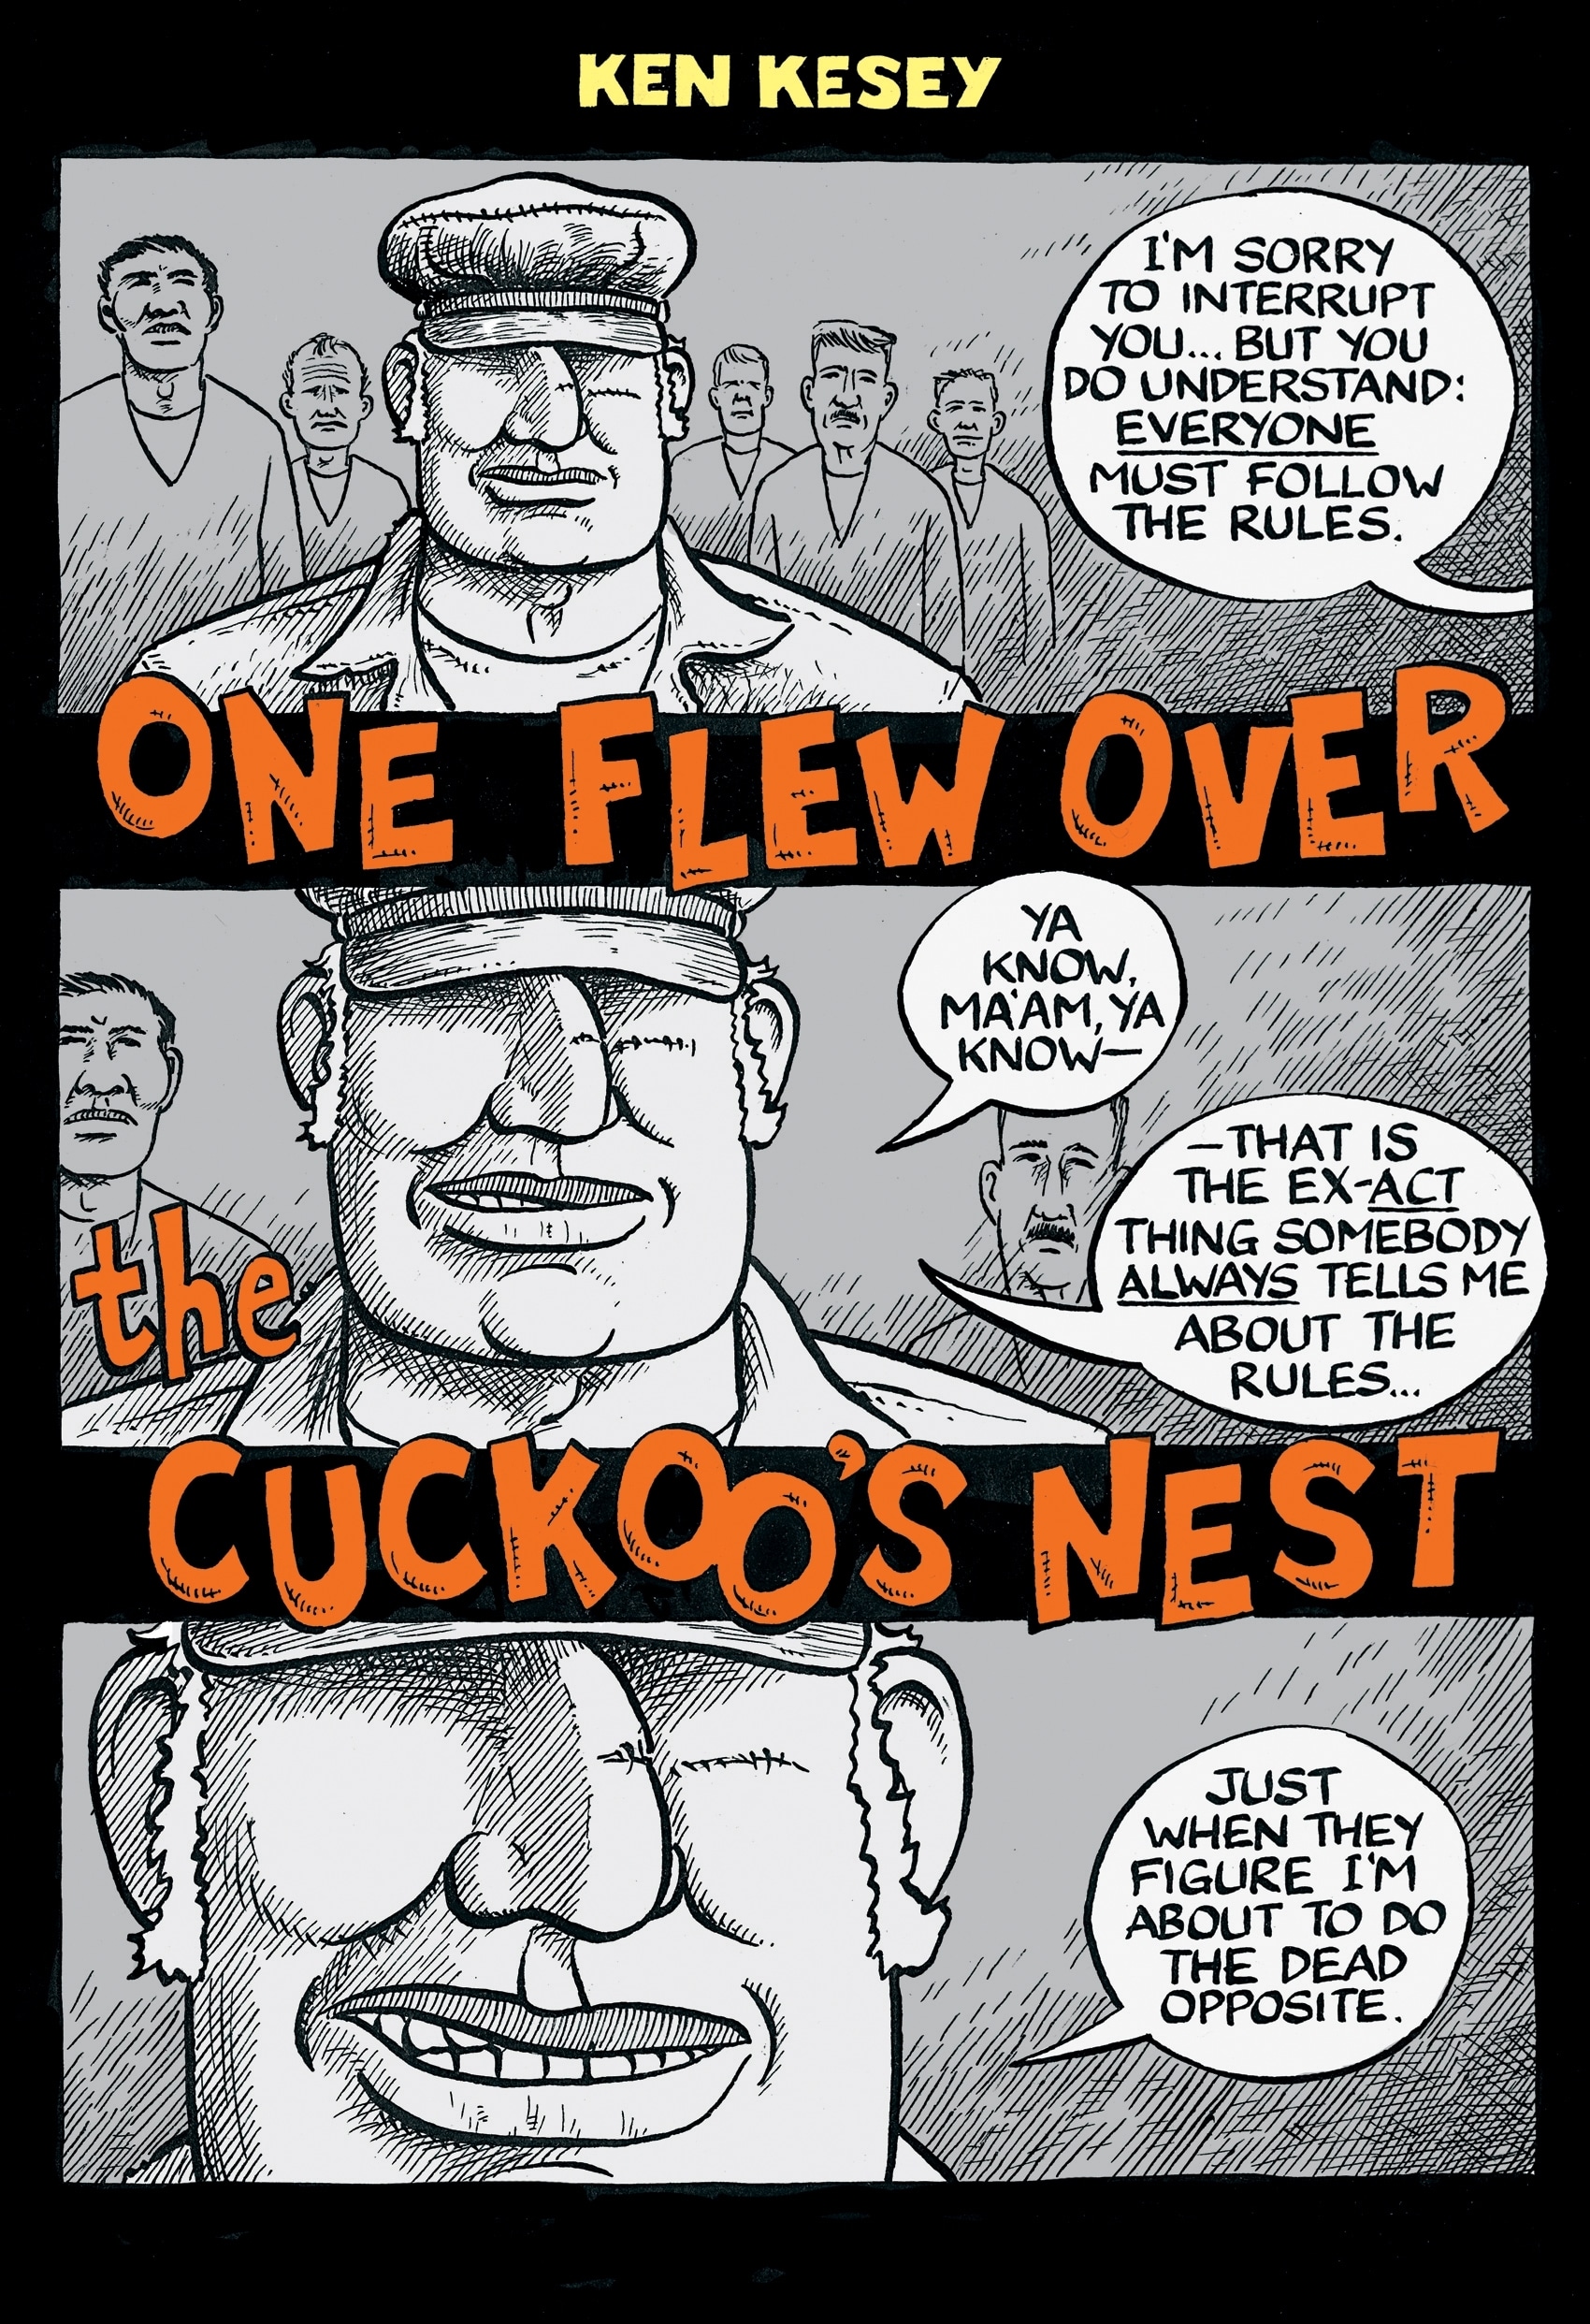 Book “One Flew Over the Cuckoo's Nest” by Ken Kesey — June 26, 2008